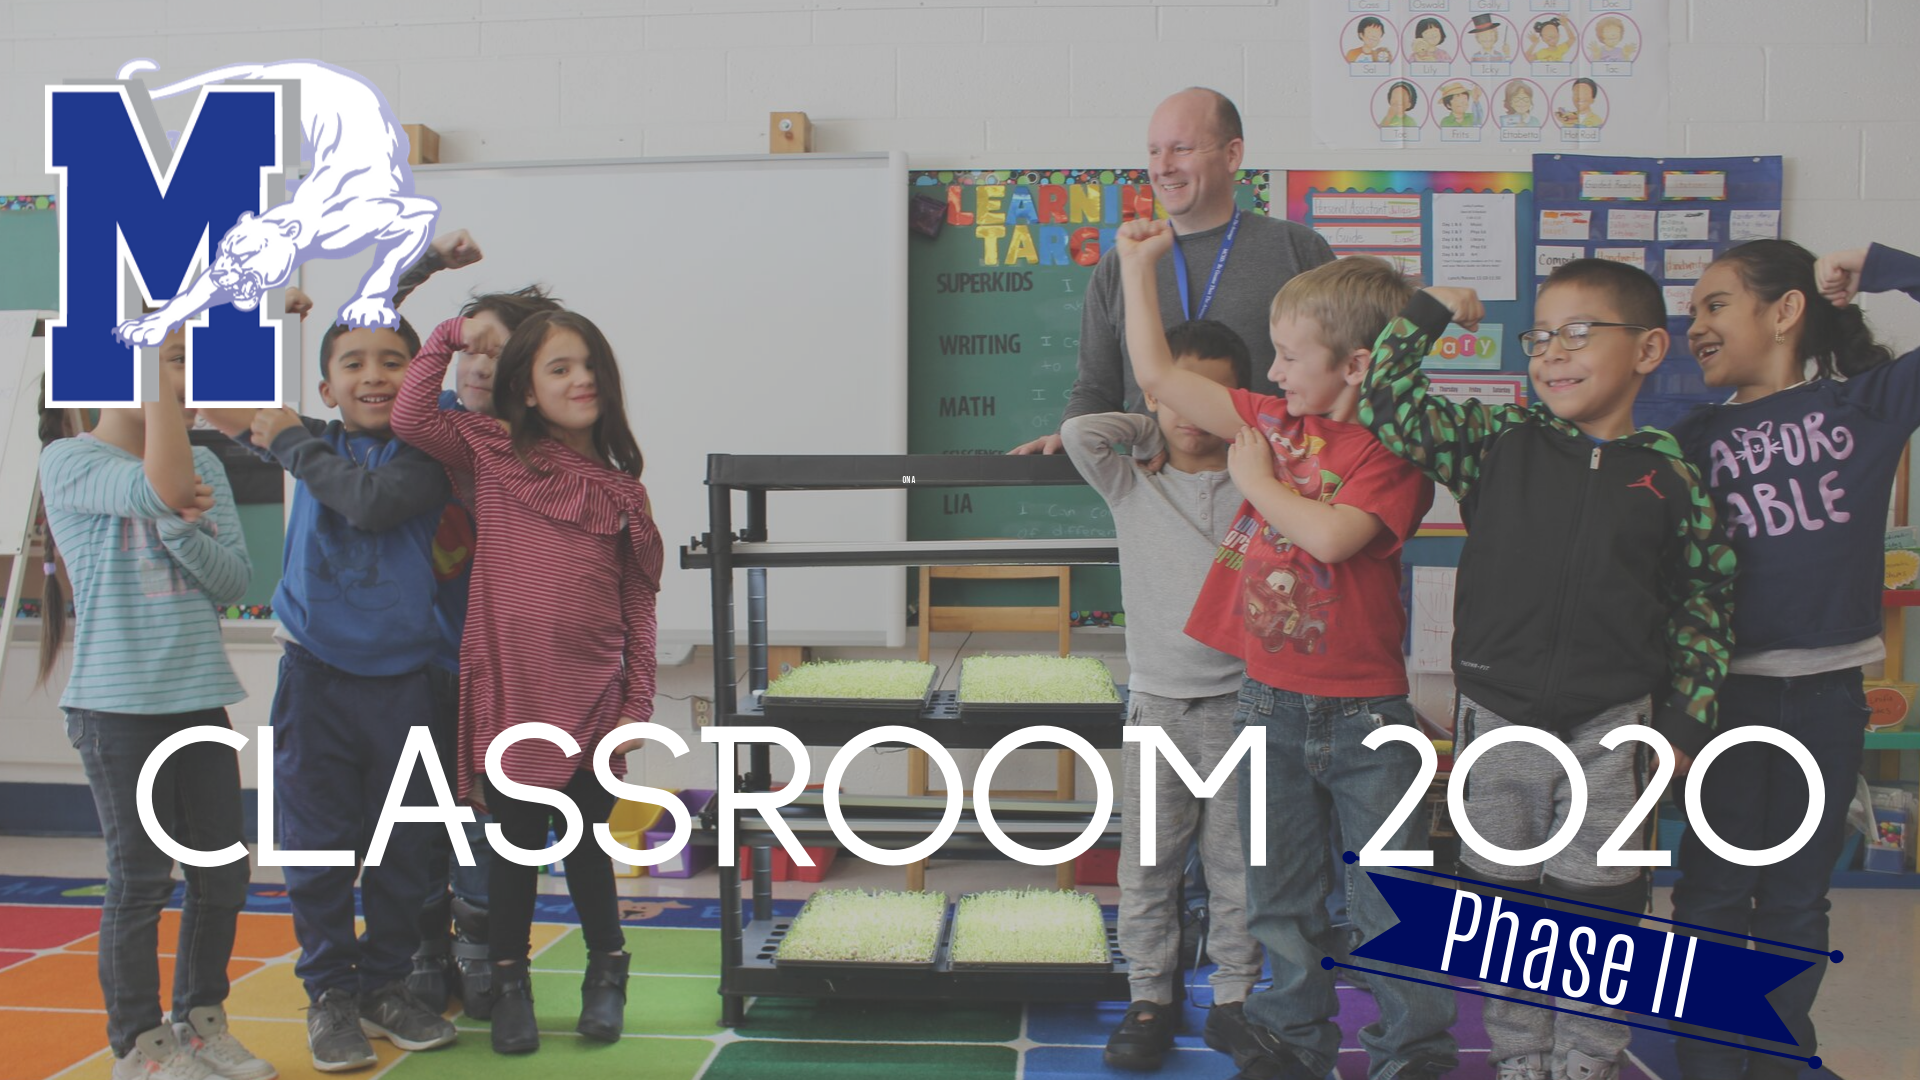 photo of students flexing muscles and the text "Classroom 2020" across the image